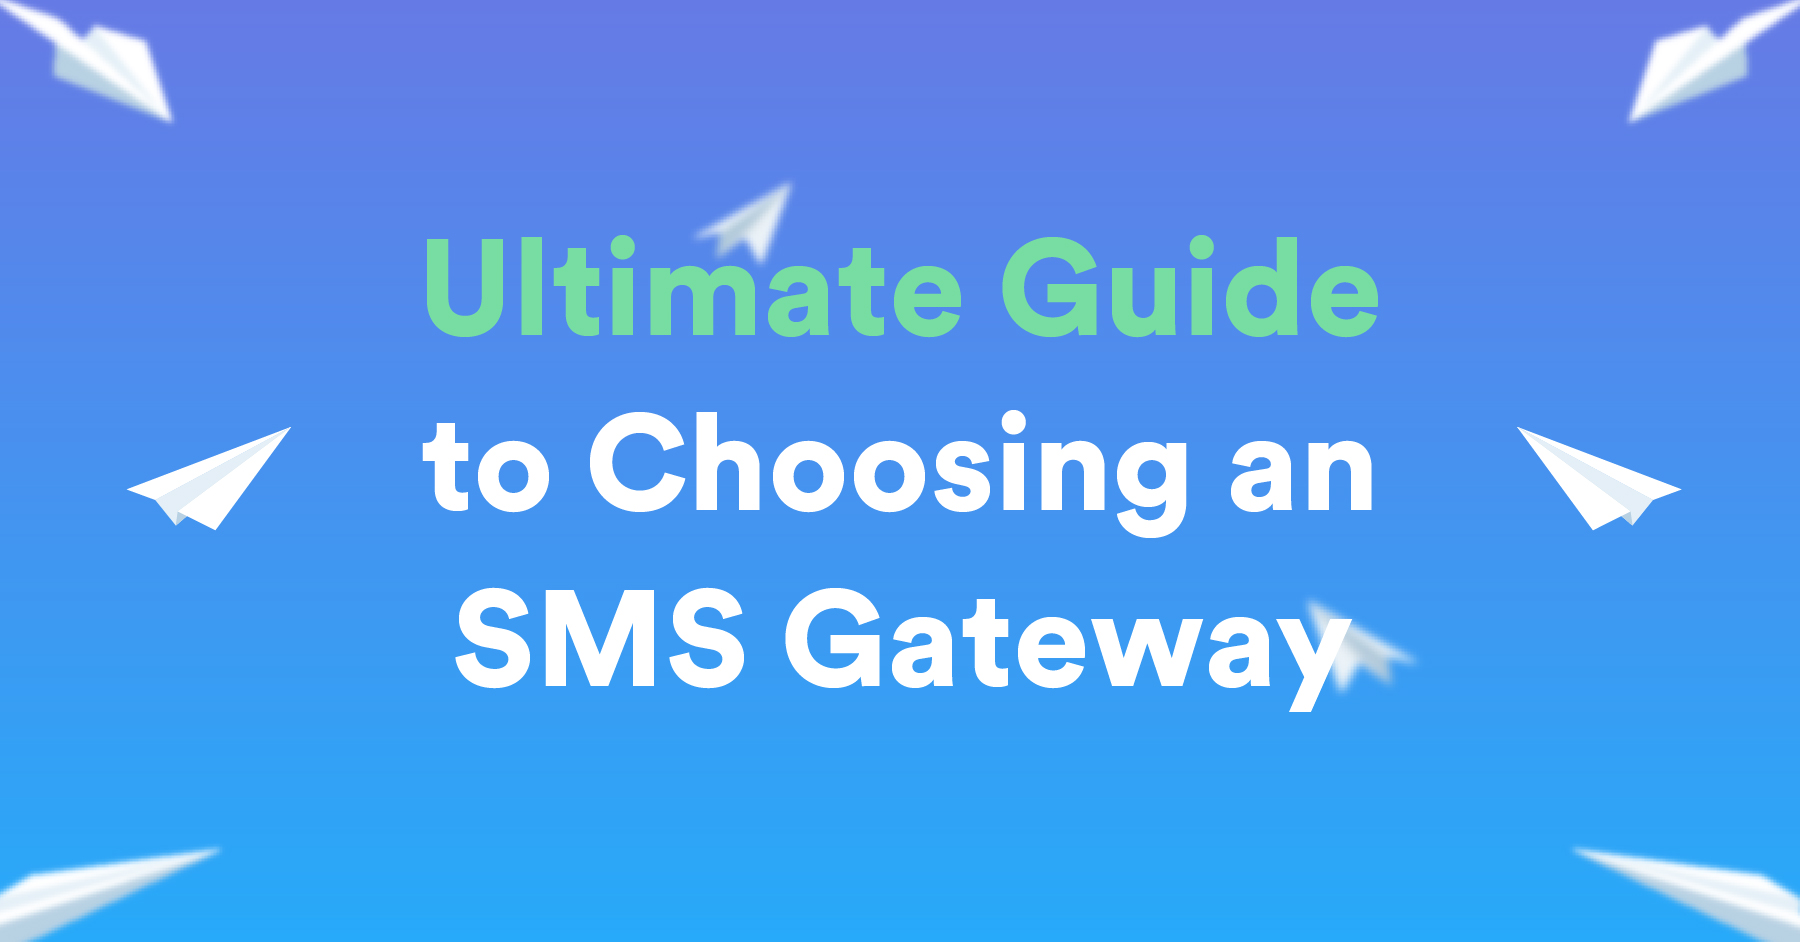 Ultimate Guide to Choosing an SMS Gateway